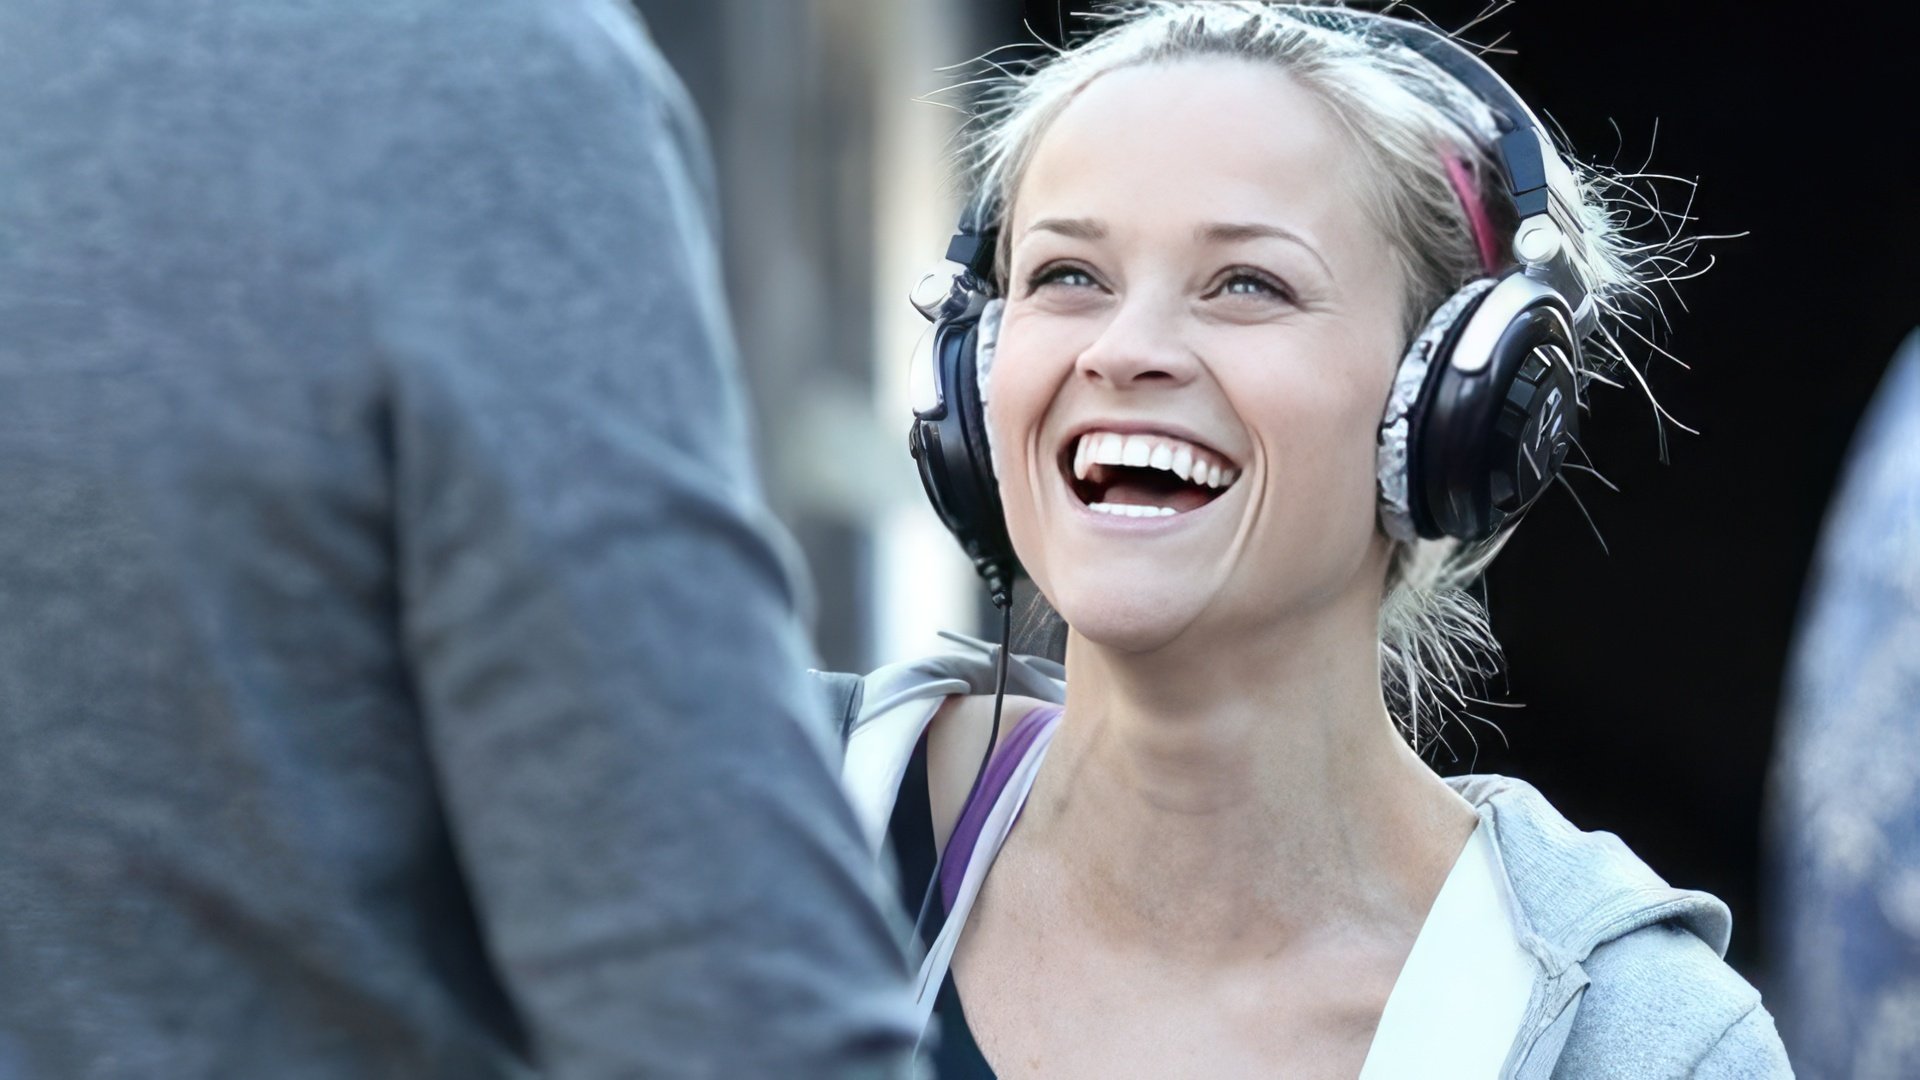 Reese Witherspoon on the set of This Means War